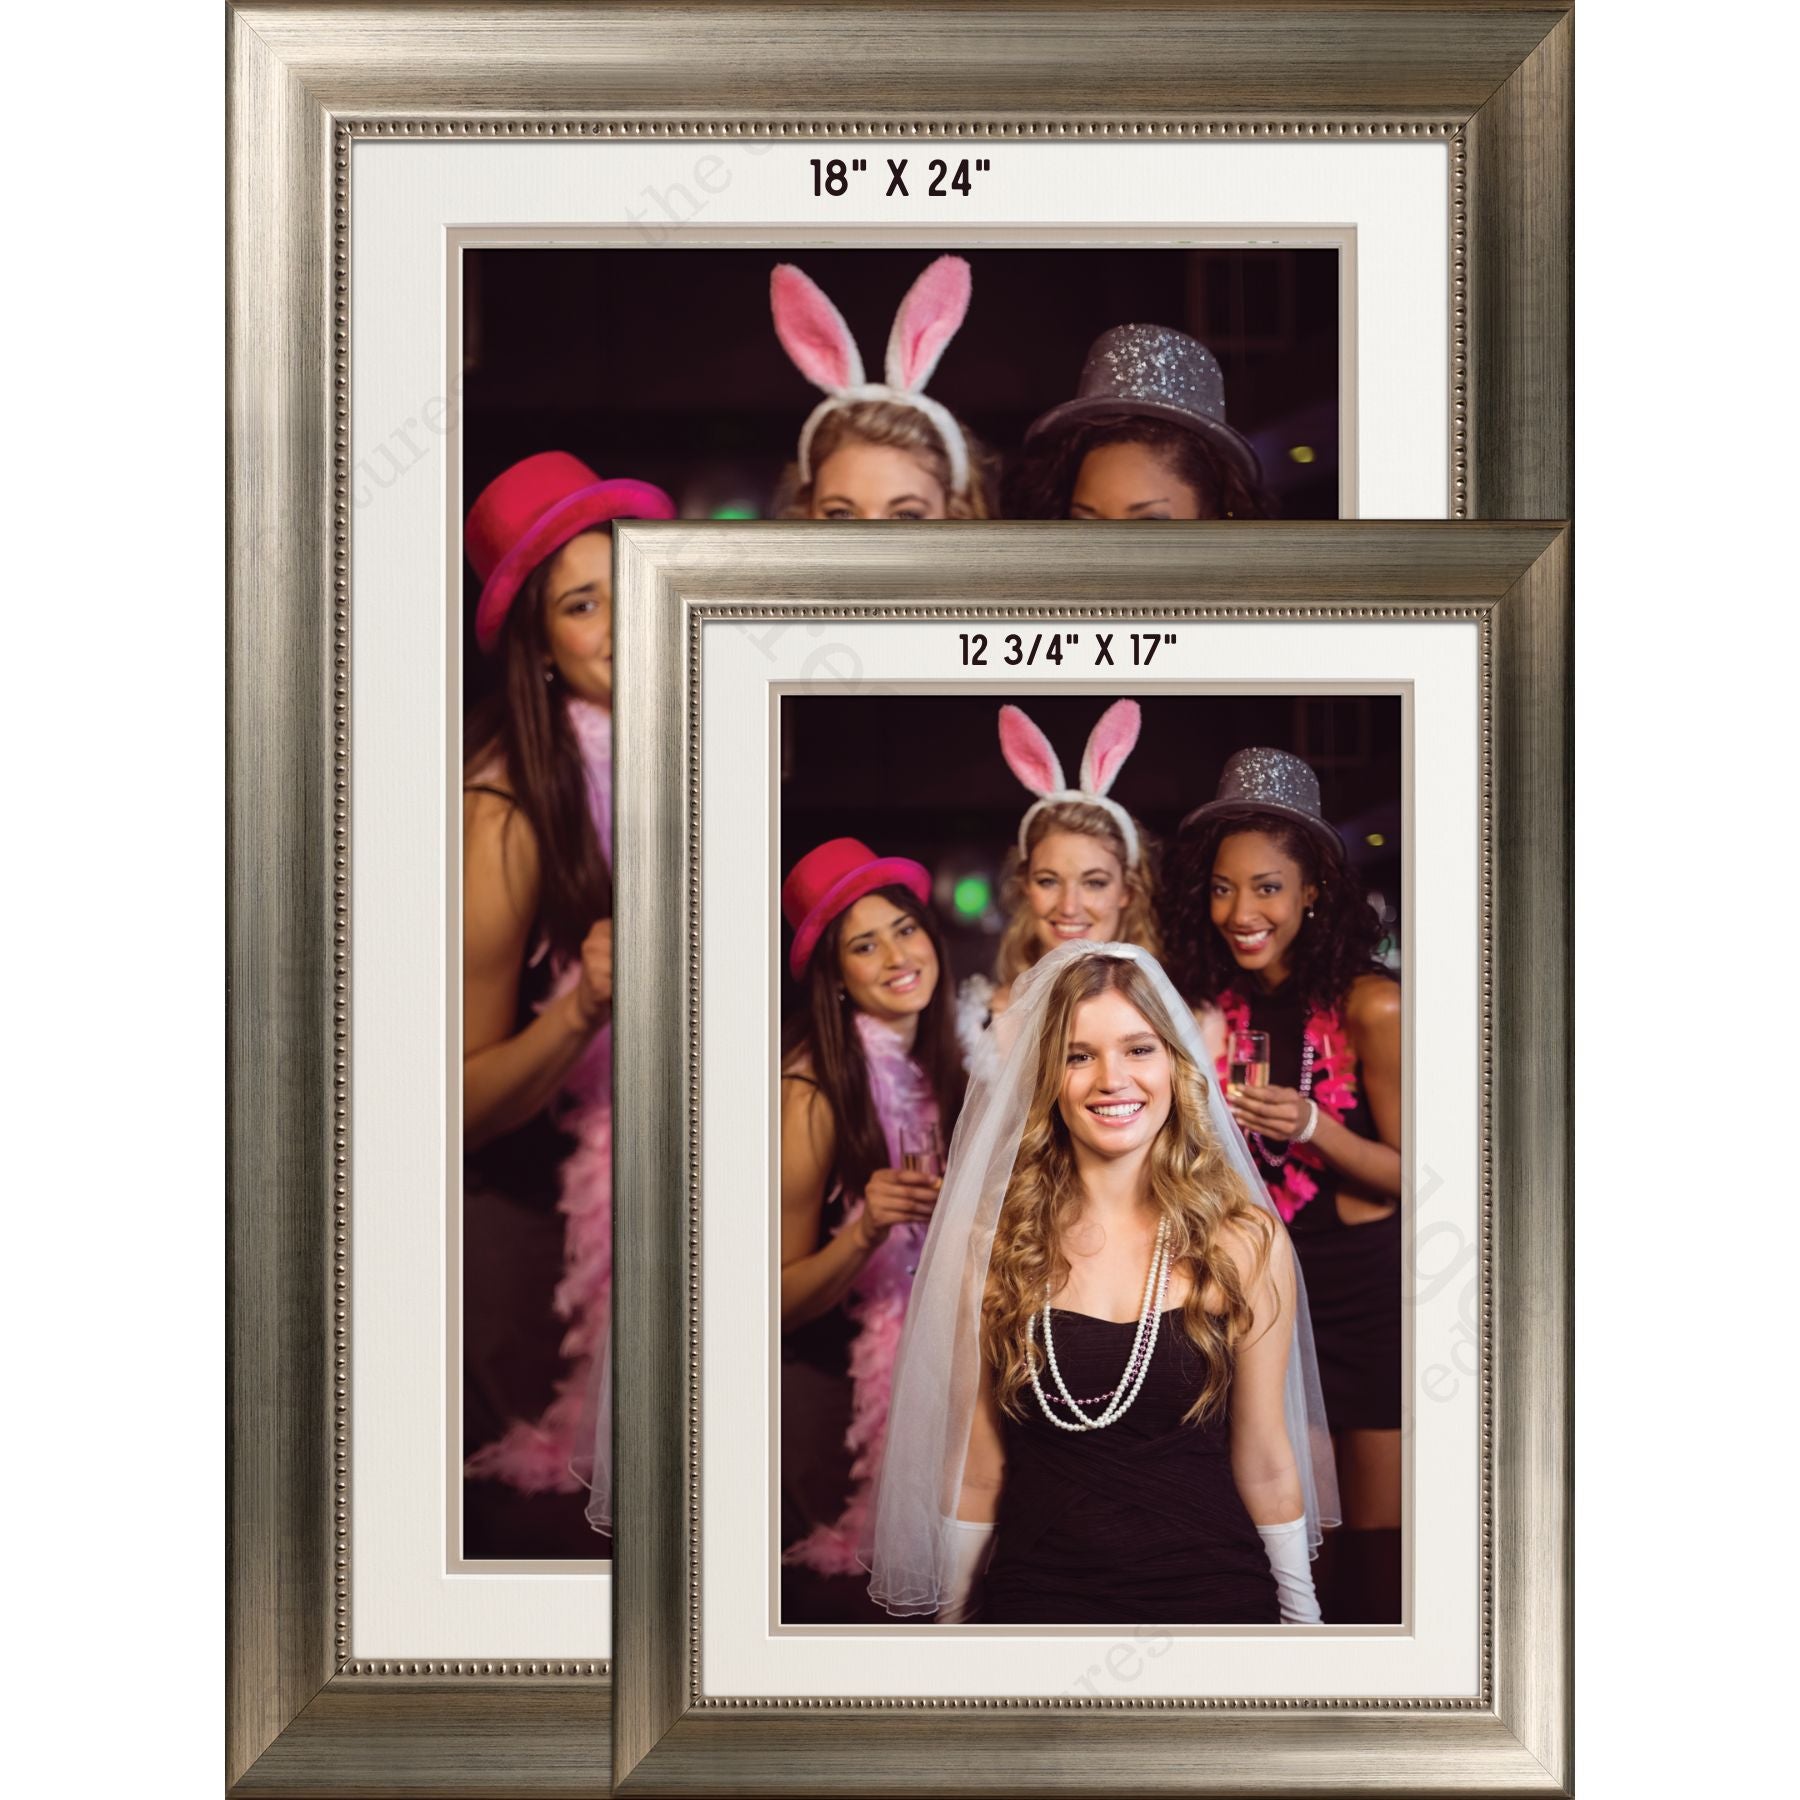 Custom Poster Silver Frame. Moveable and removeable. Celebrate Memories!